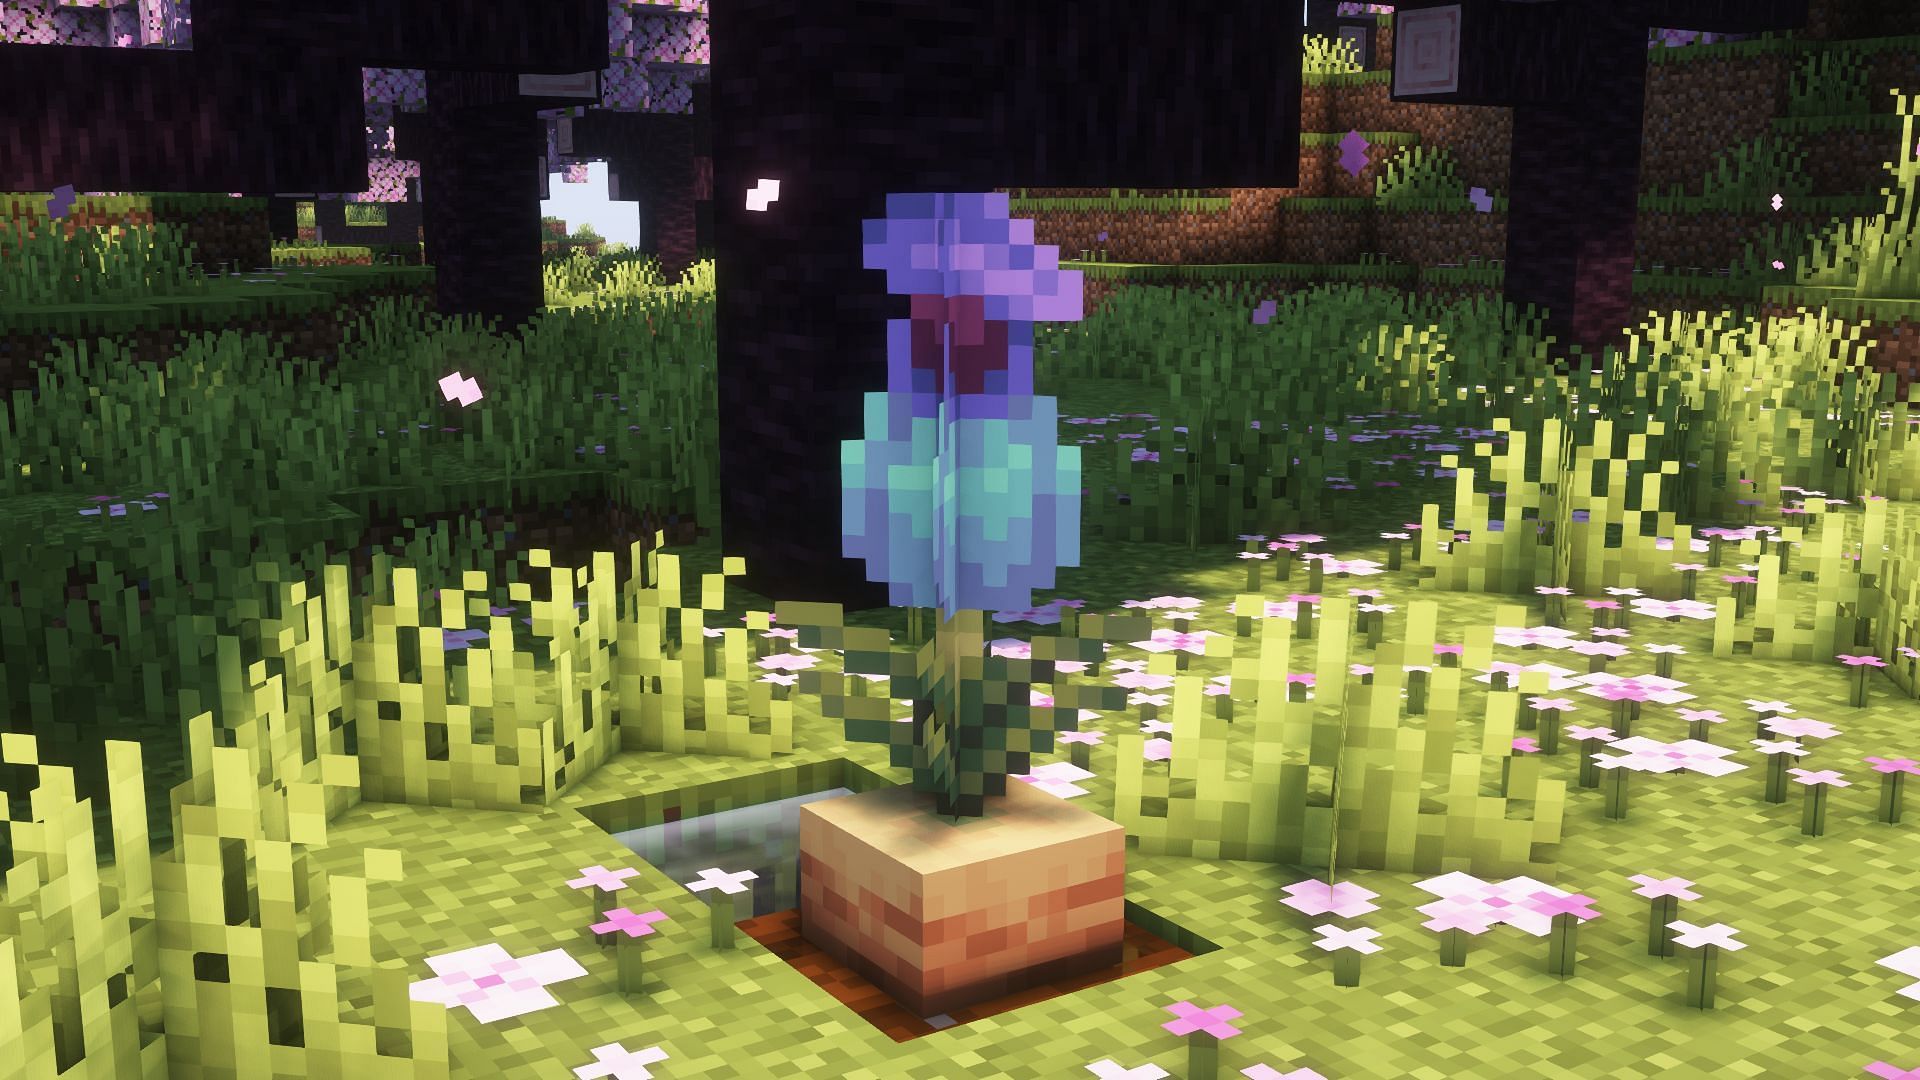 A pitcher plant in Minecraft snapshot 23w12a (Image via Mojang)